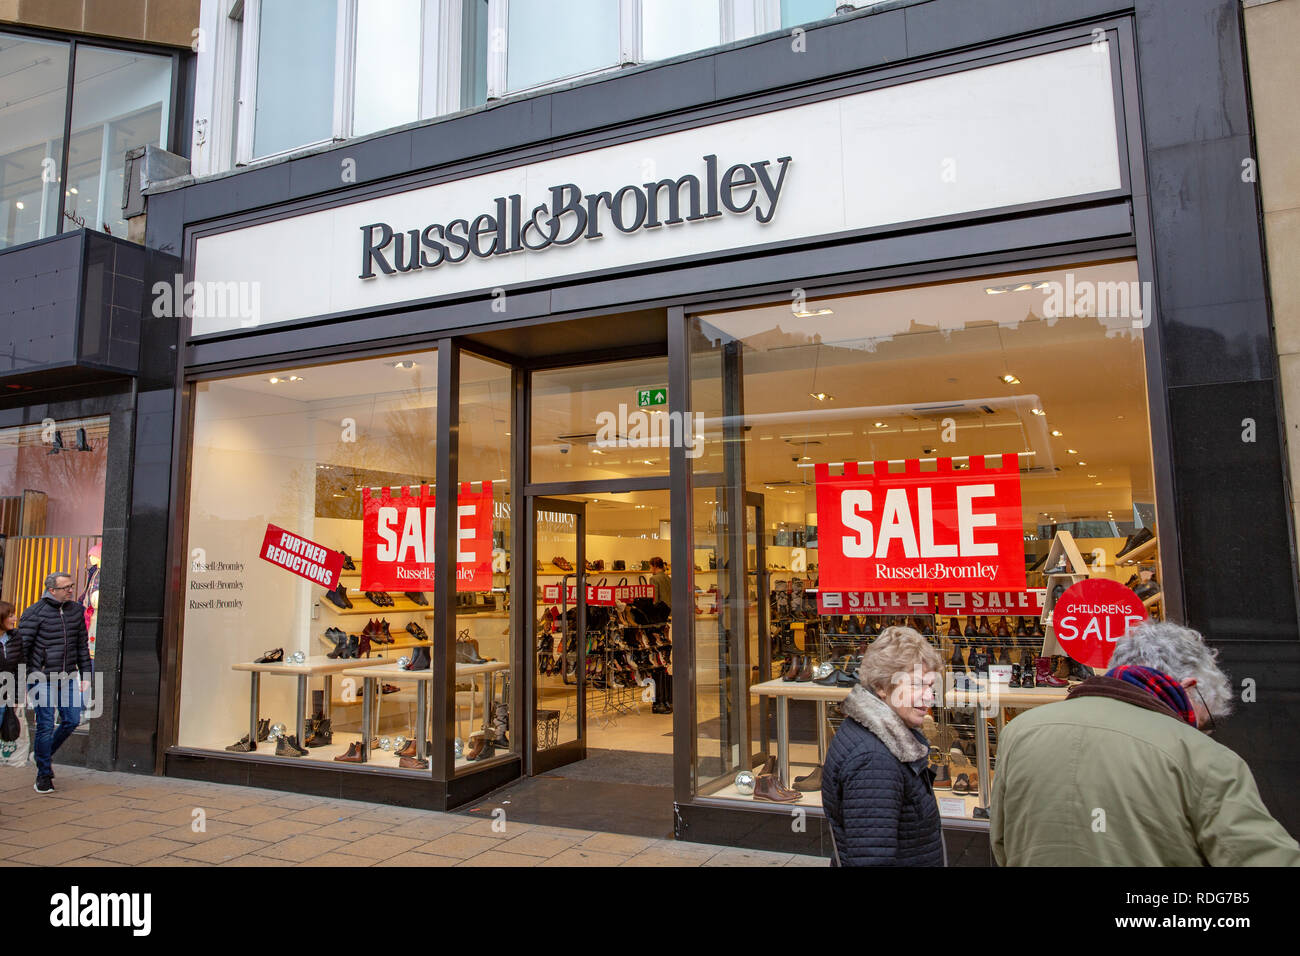 bromley russell sales